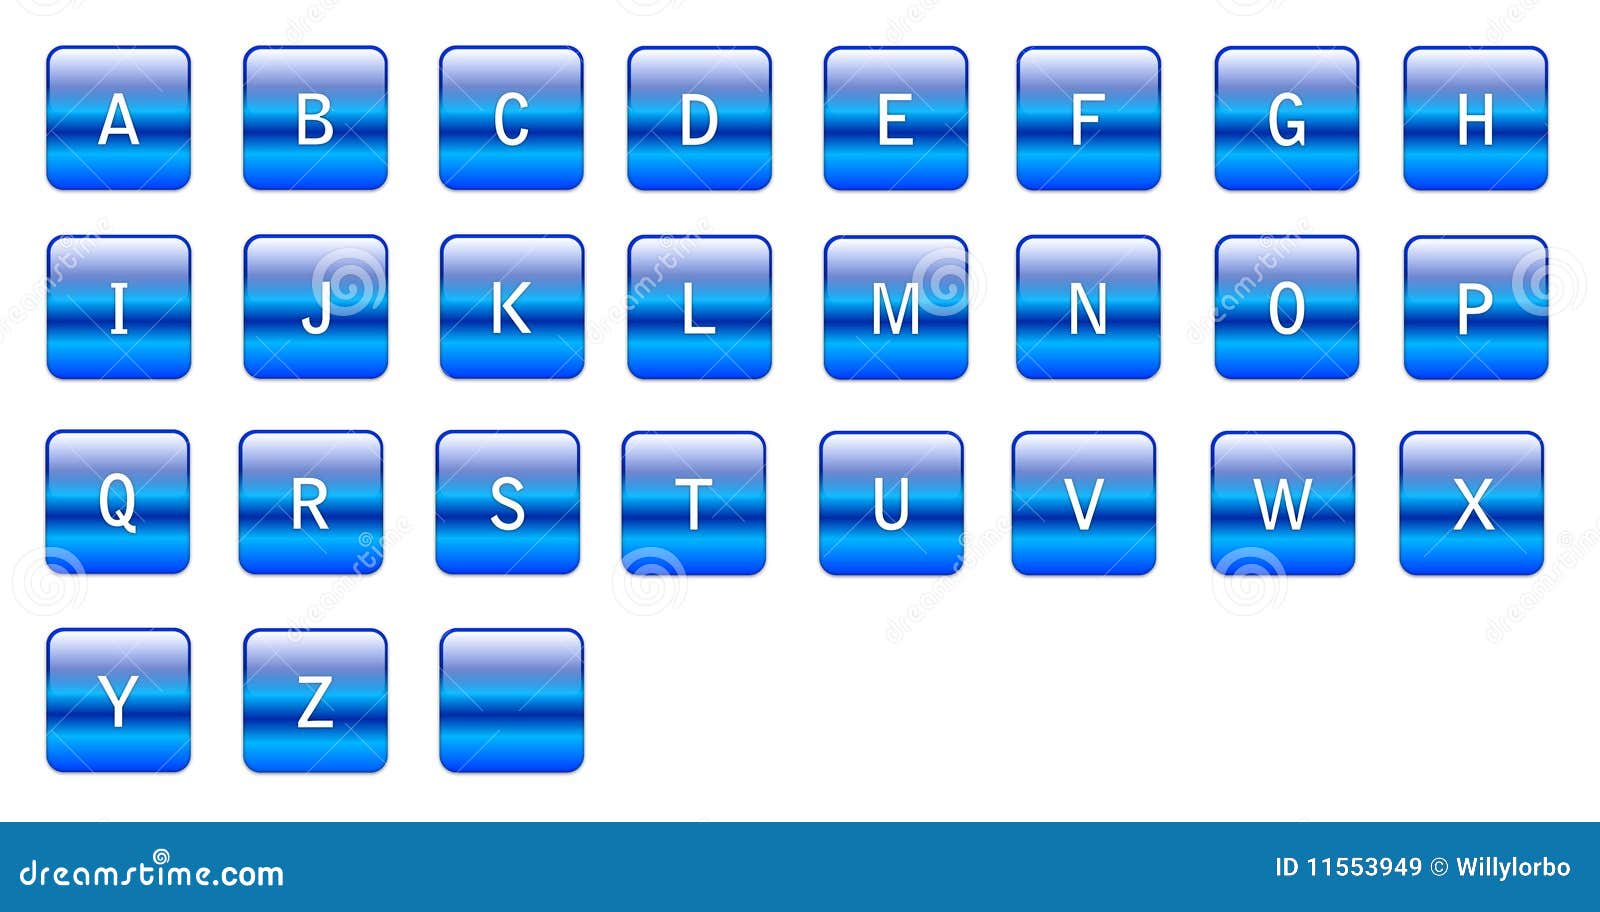 alphabetical blue characters